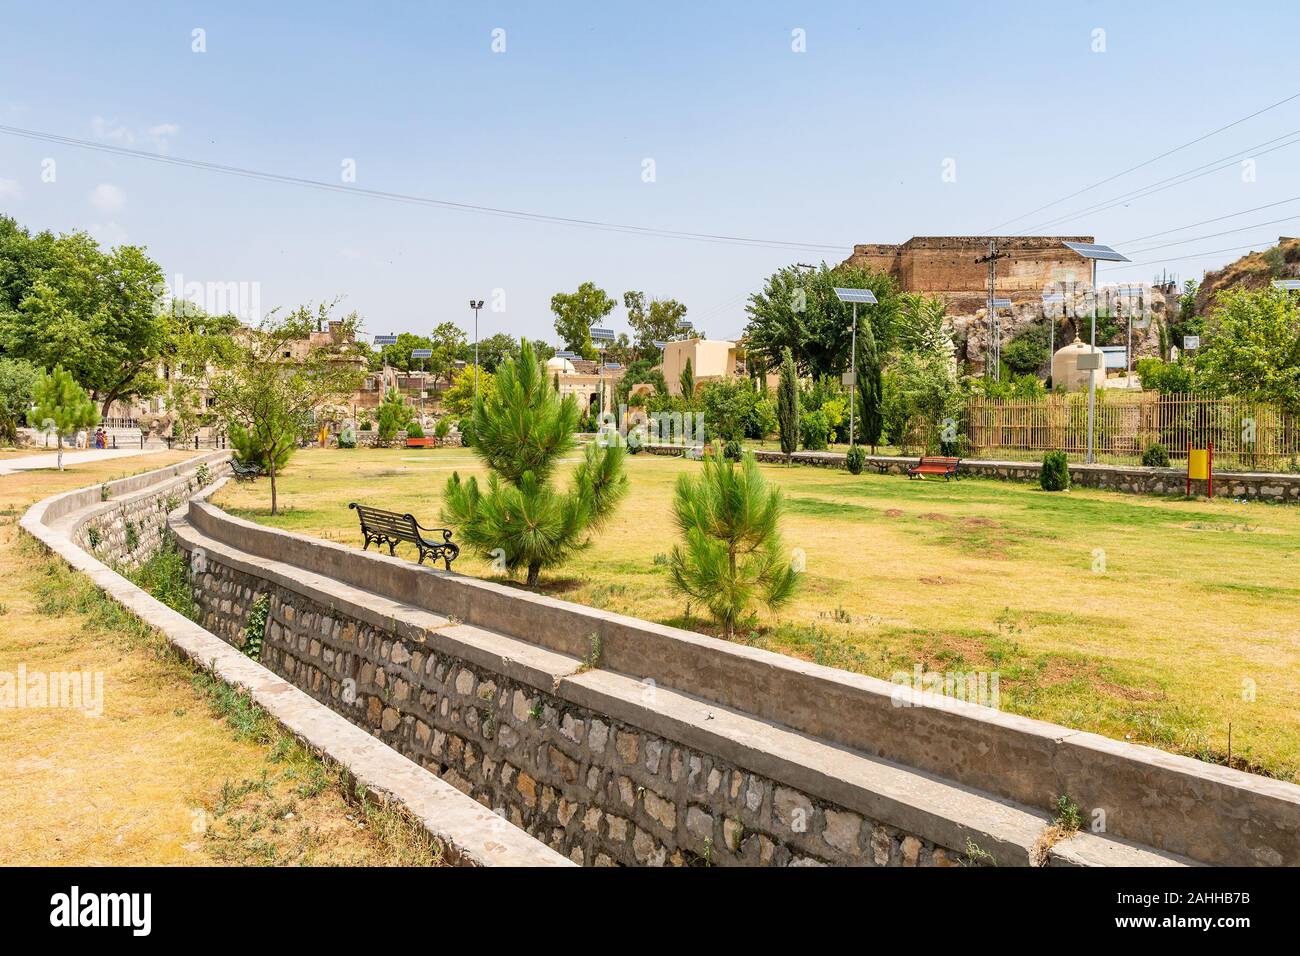 Chakwal Qila Katas Raj Hindu Temples Dedicated to Shiva Picturesque View of a Canal on a Sunny Blue Sky Day Stock Photo